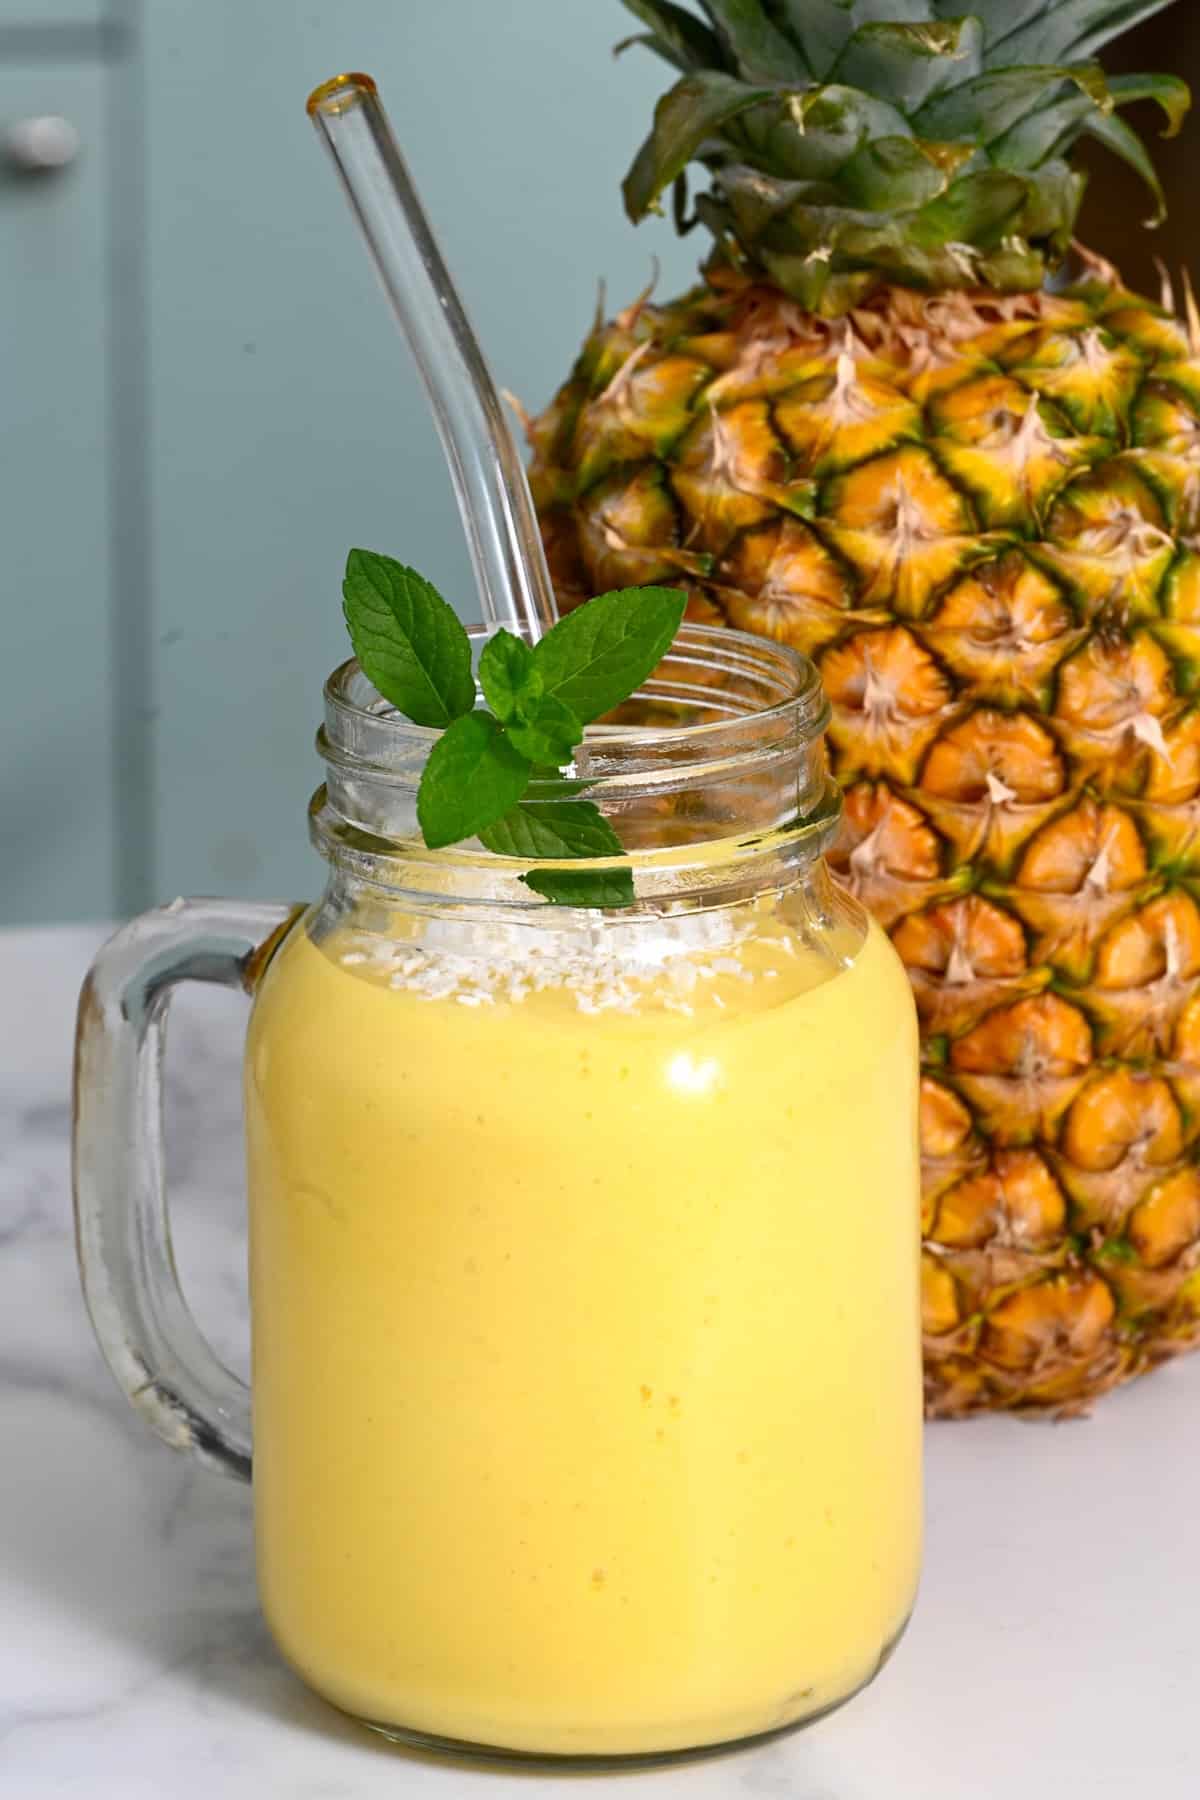 Pineapple mango smoothie with a straw and mint leaves